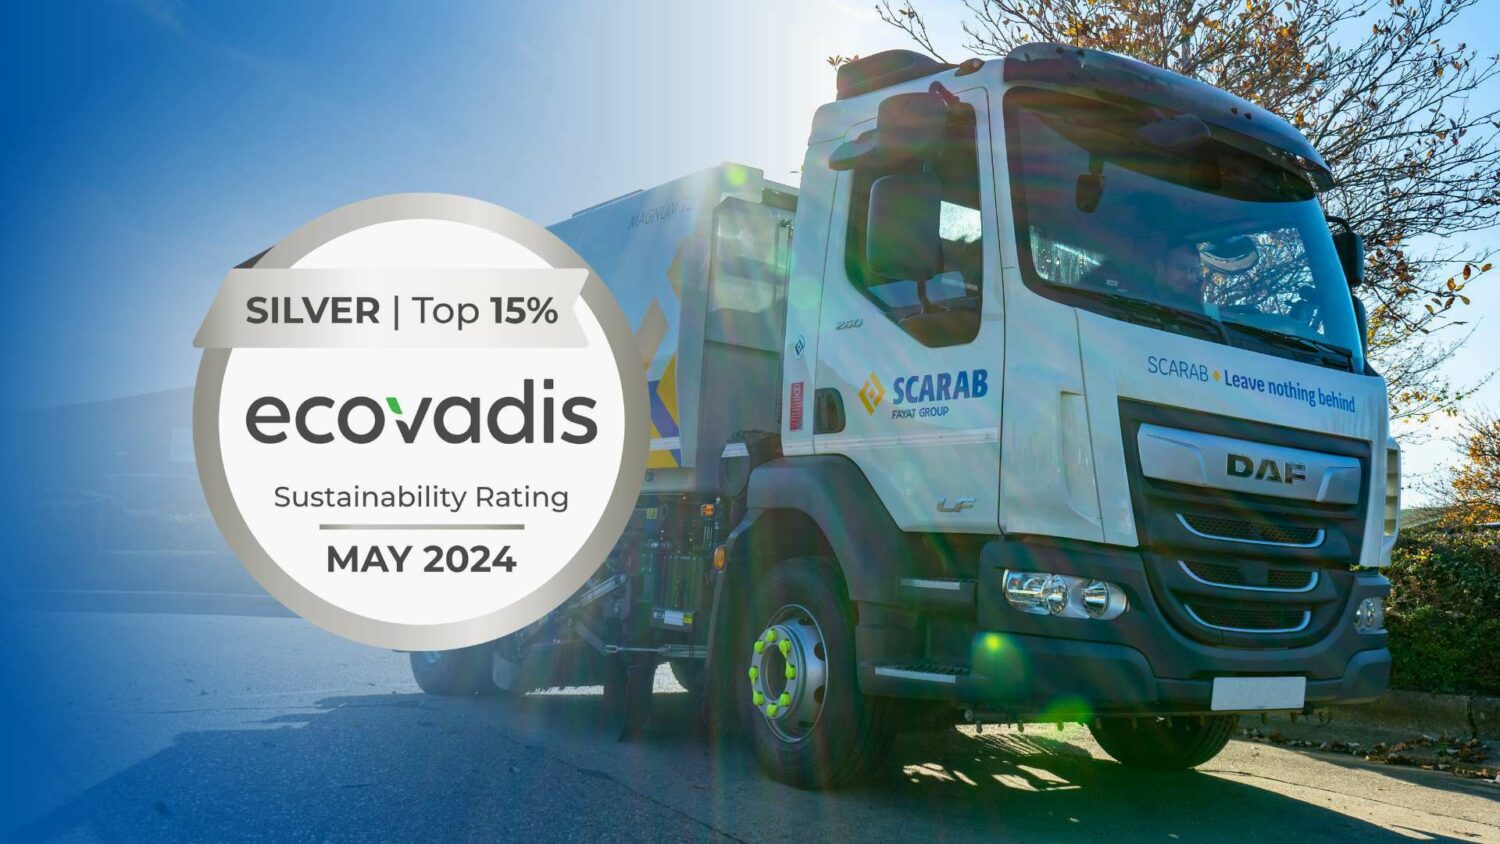 SCARAB Earns Coveted Silver Medal from EcoVadis